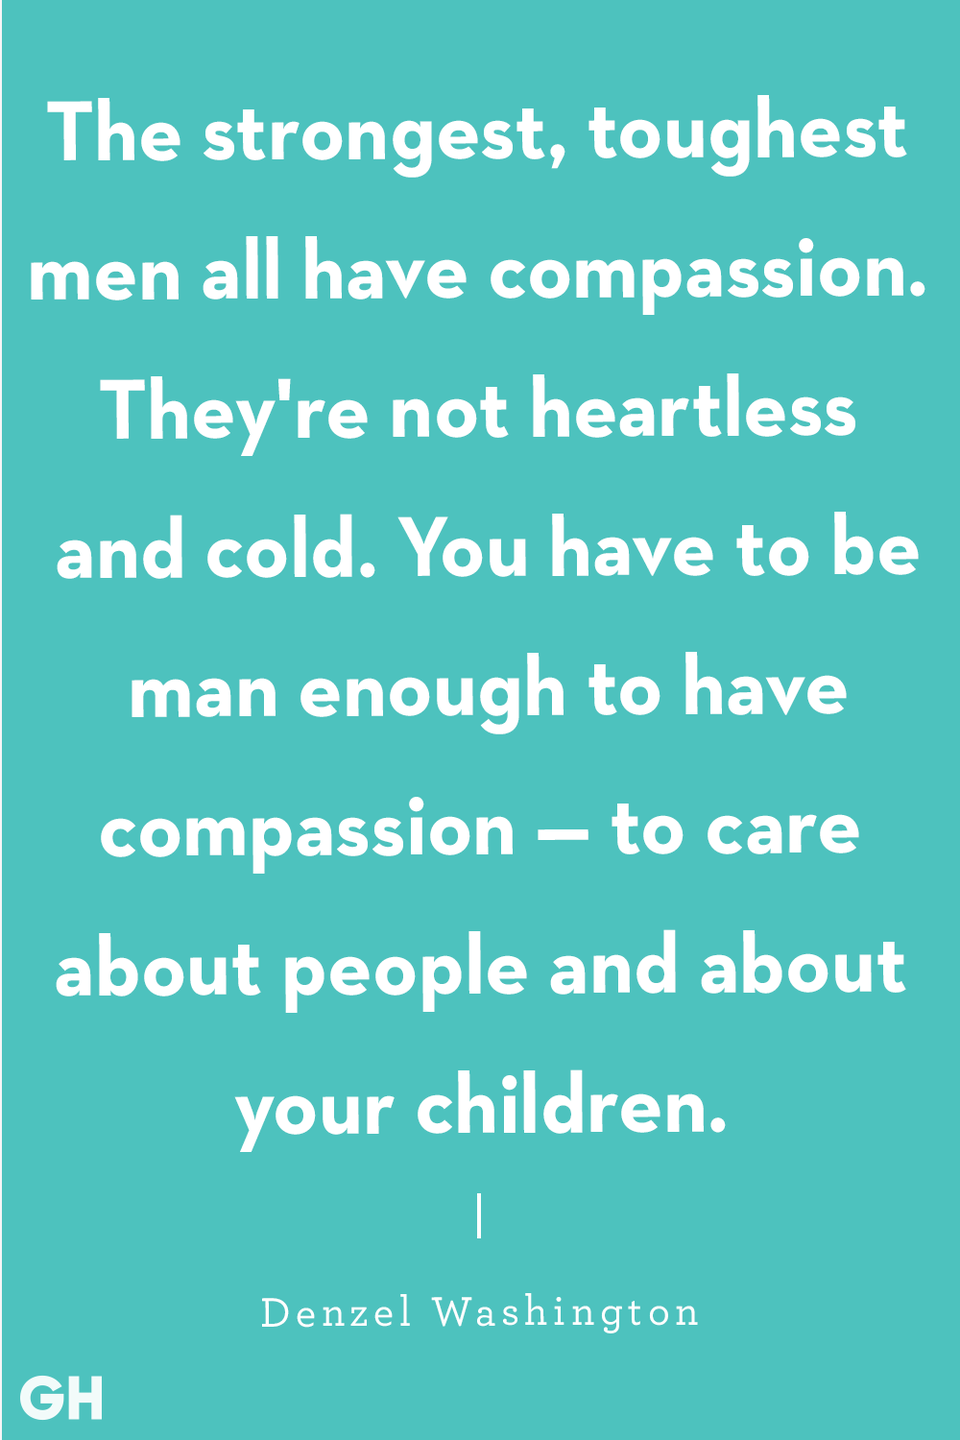 <p>"The strongest, toughest men all have compassion. They're not heartless and cold. You have to be man enough to have compassion — to care about people and about your children."</p>